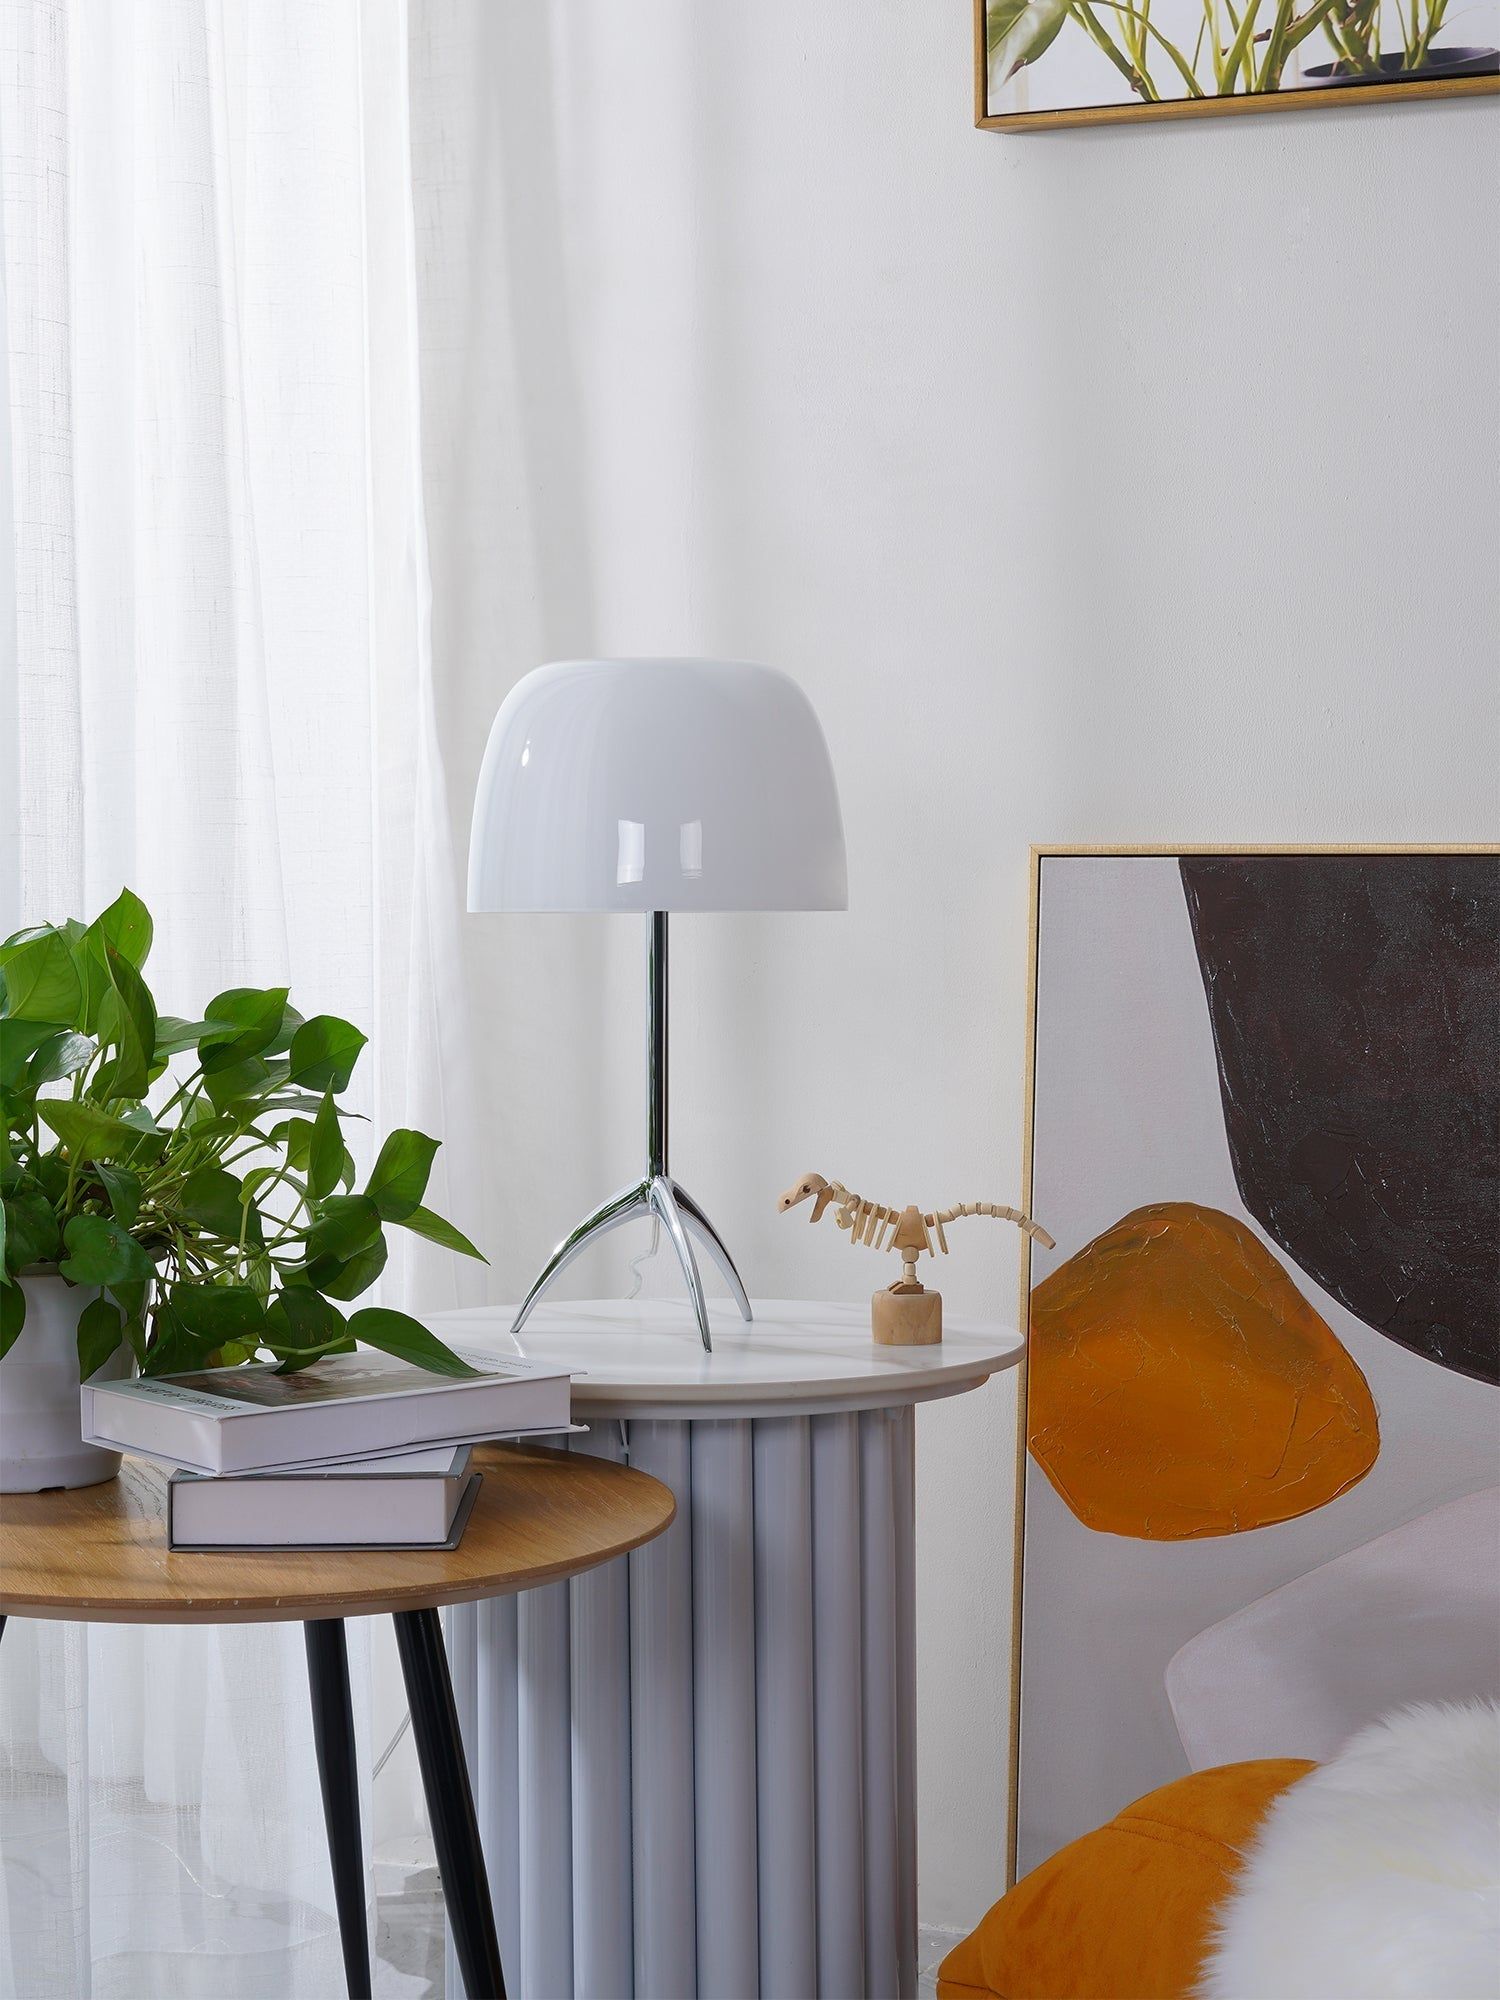 Bedside Lamp Designs Stylish Illumination: Creative Ideas for Bedside Lamps